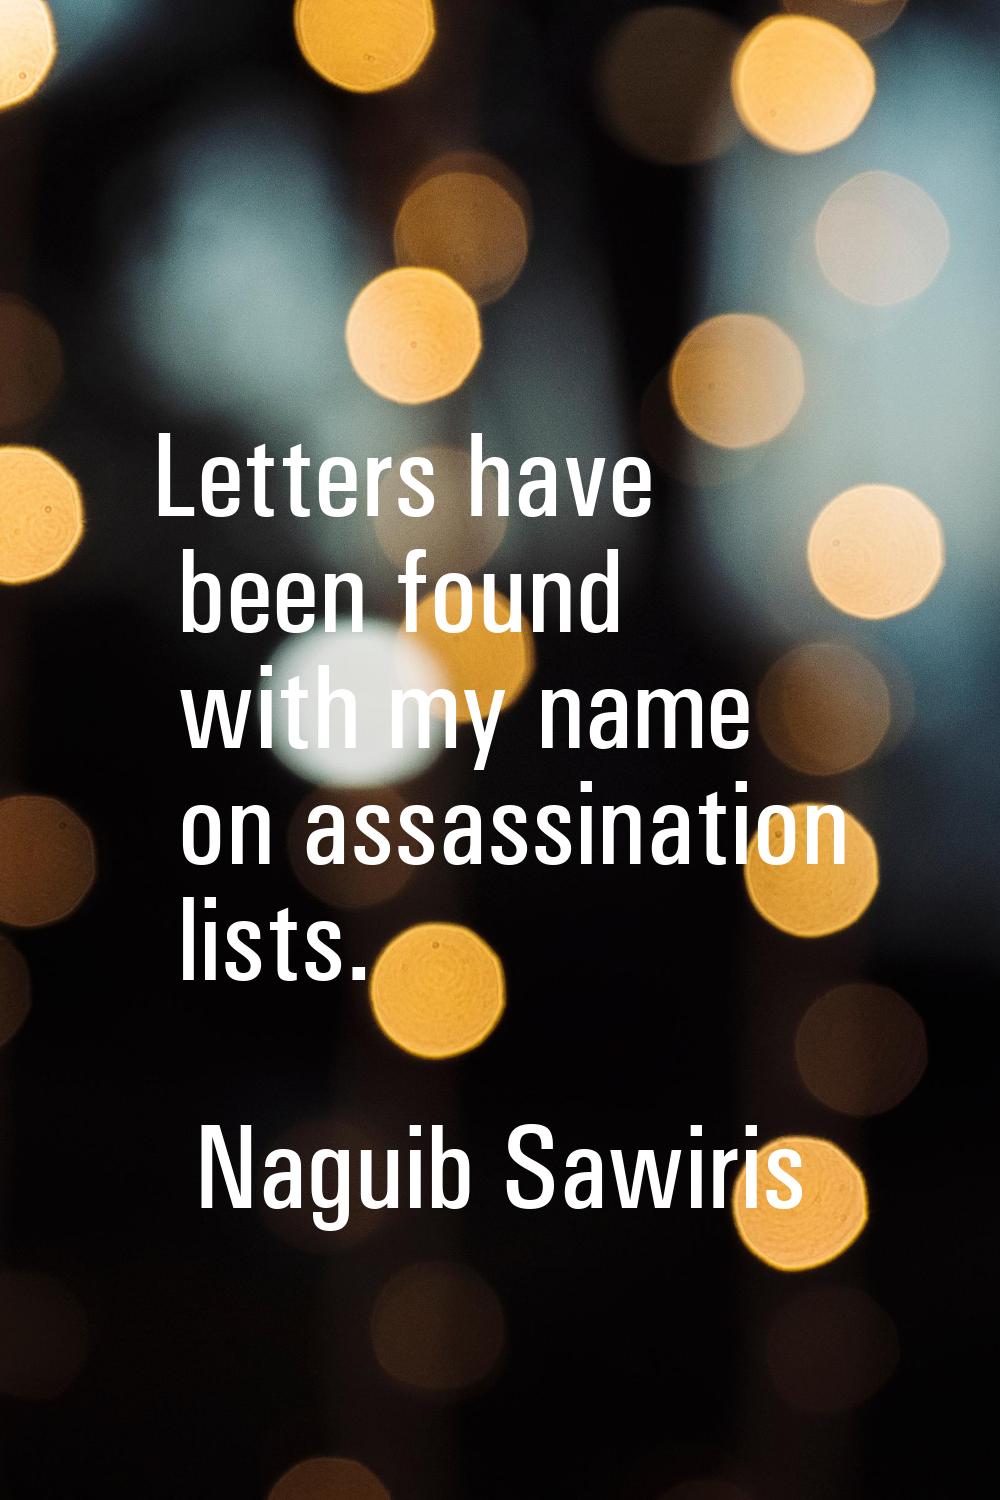 Letters have been found with my name on assassination lists.